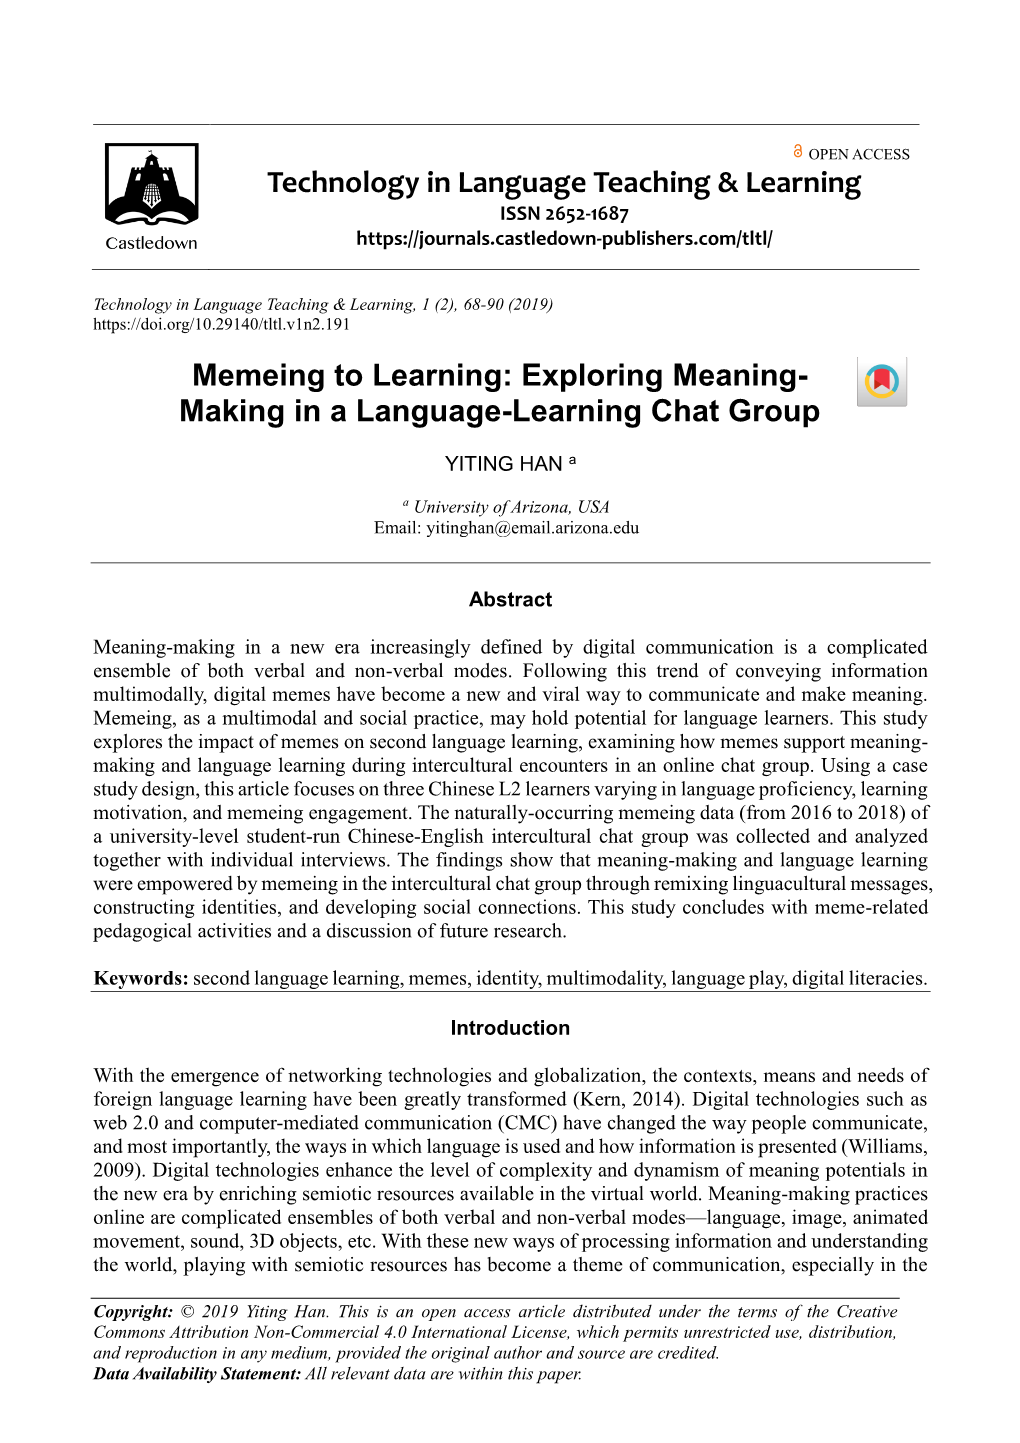 Memeing to Learning: Exploring Meaning-Making in a Language-Learning Chat Group 69